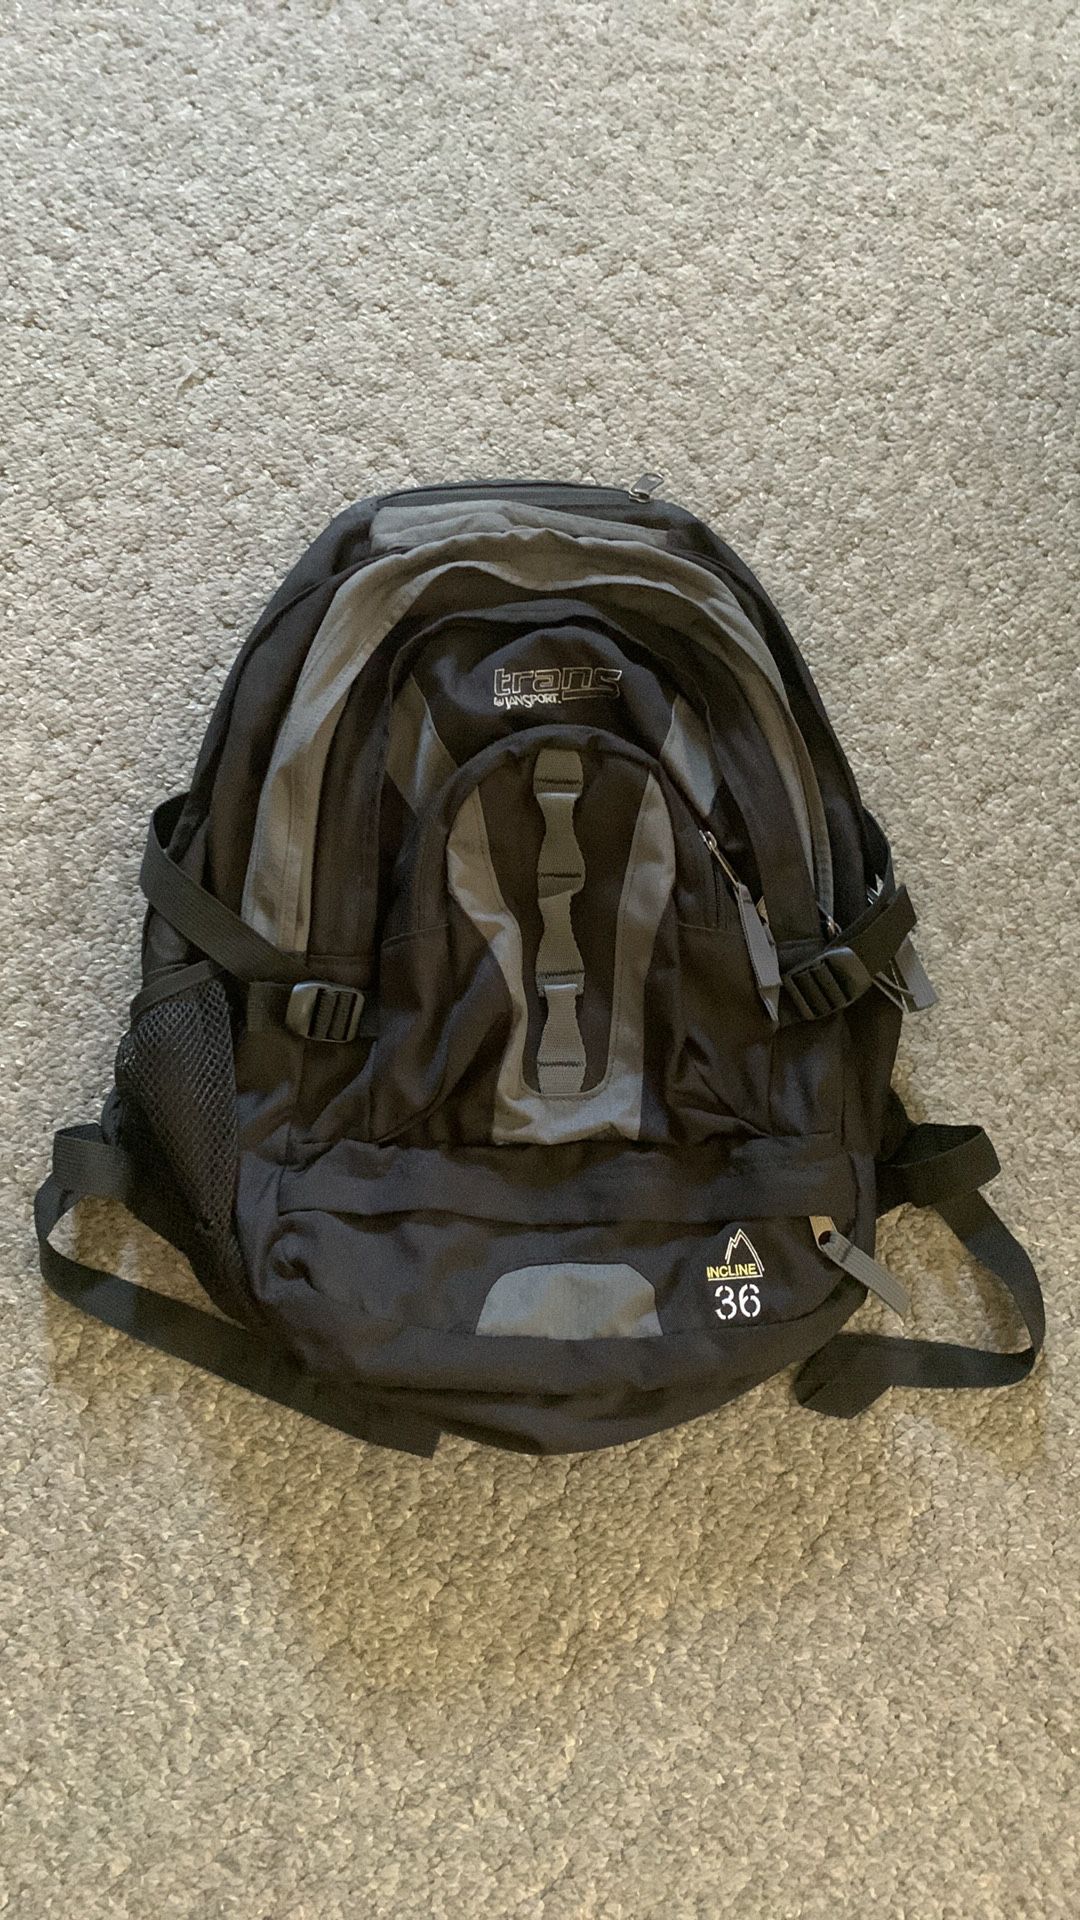 Trans by Jansport Incline 36 Backpack